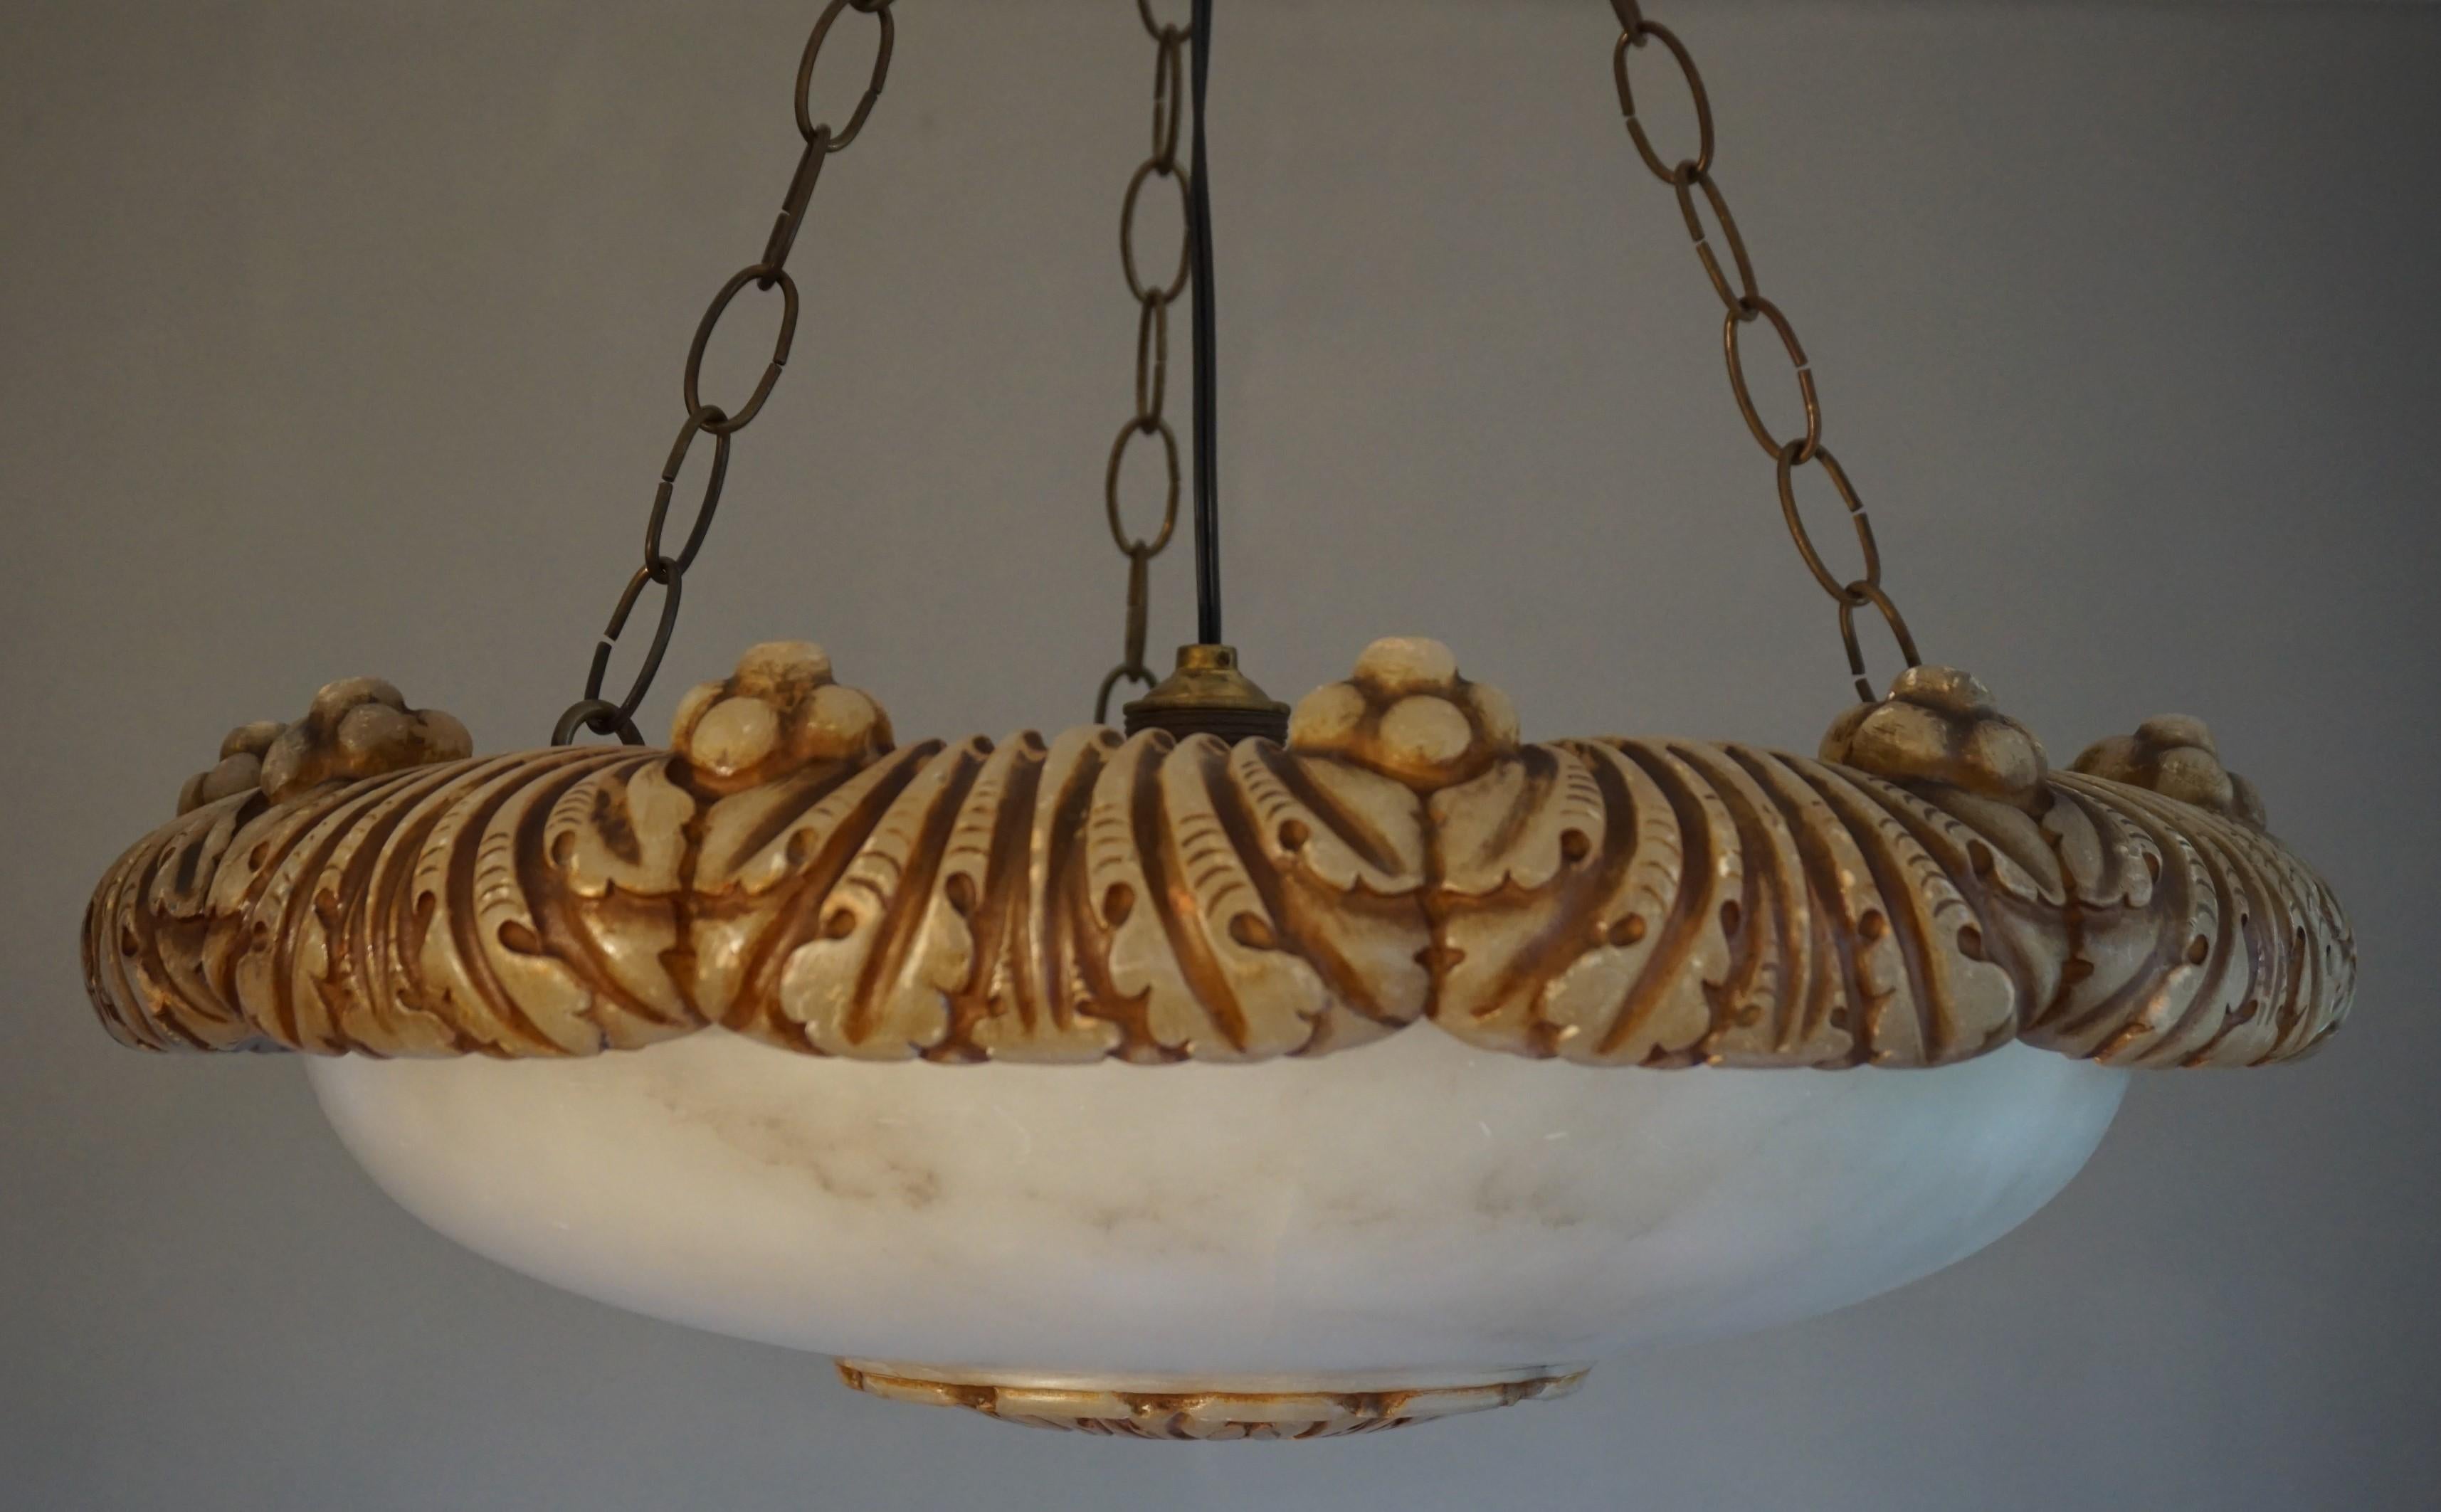 Marvelous size and shape antique pendant.

If you are looking for the perfect pendant to grace your living room, kitchen, bedroom or large hallway then this handcrafted antique could be perfect for you. This highly stylish and majestic alabaster